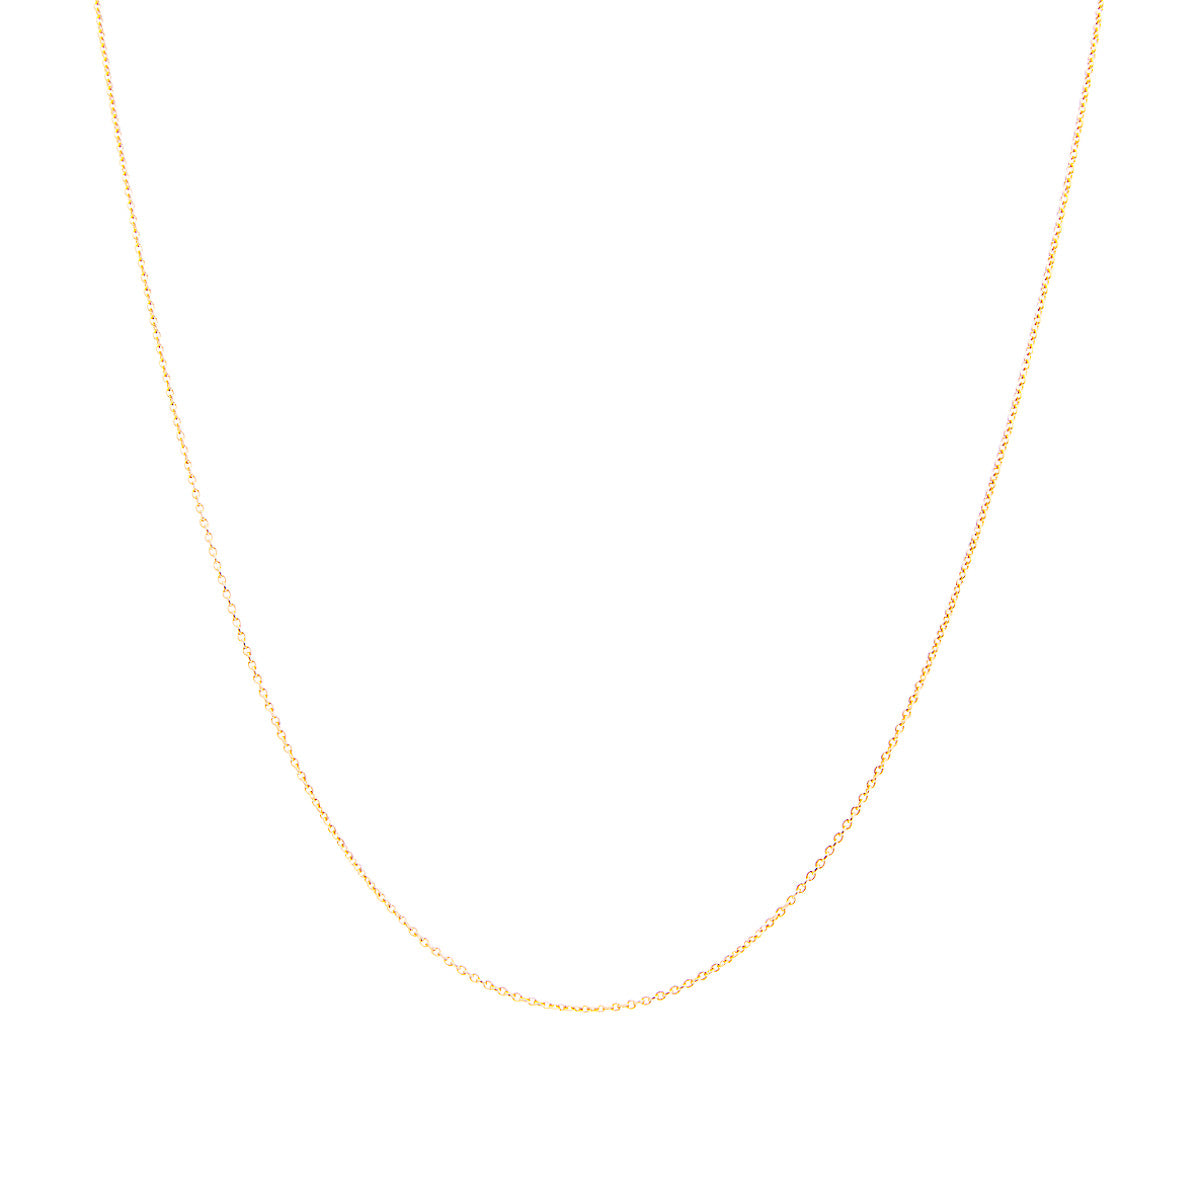 Fink's Jewelers 14K Yellow Gold Cable Chain Necklace